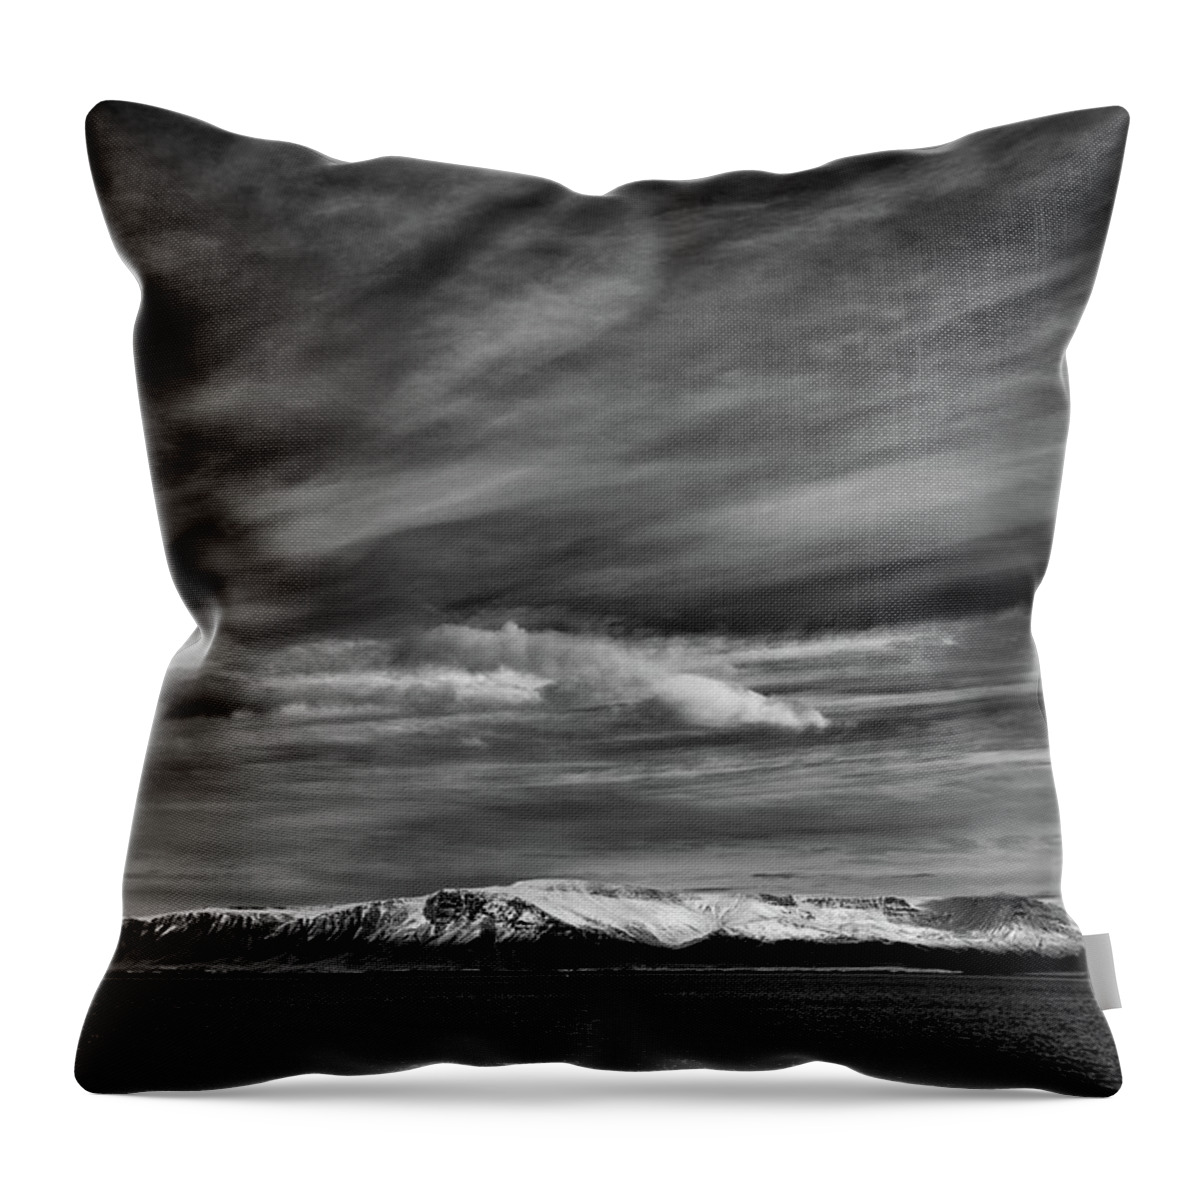 Kambshorn Throw Pillow featuring the photograph Icelandic Mountains by Nigel R Bell